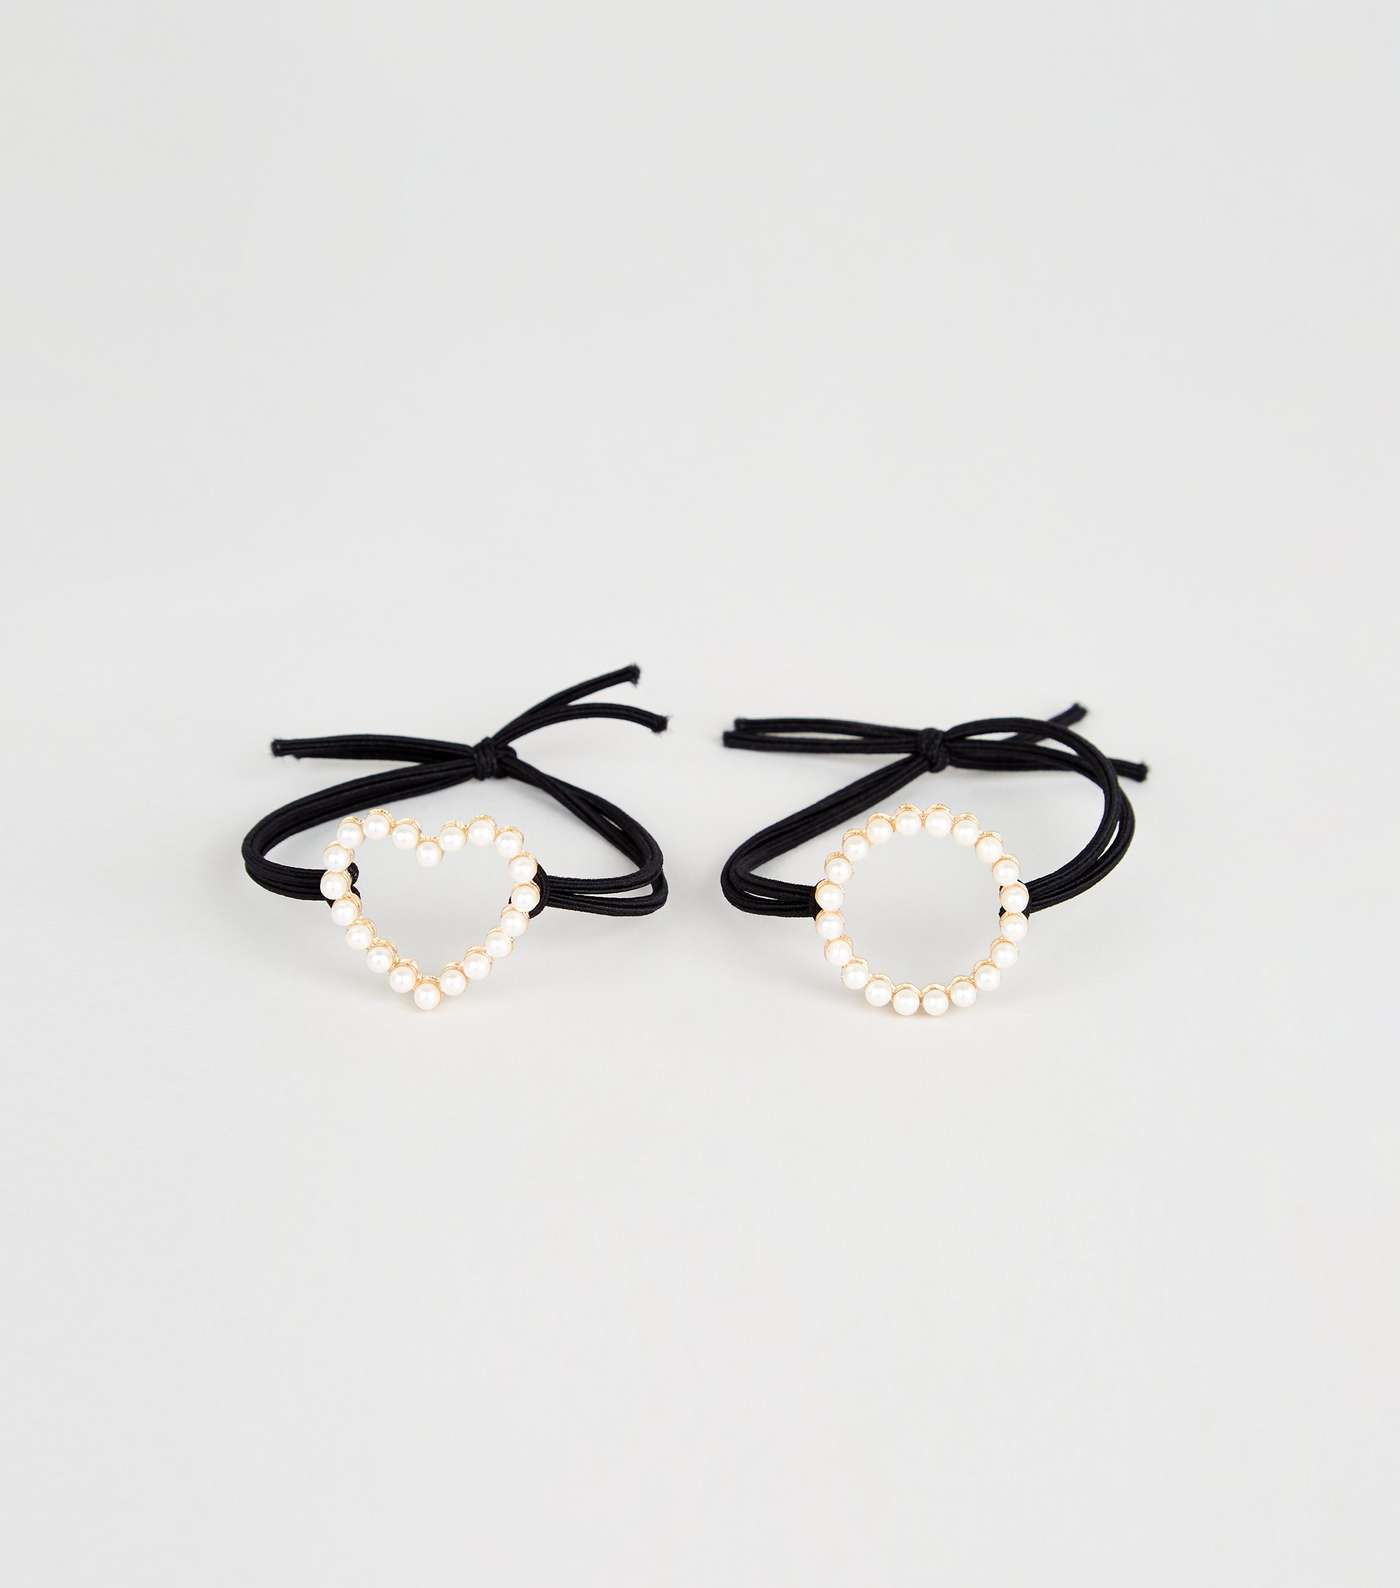 2 Pack Black Faux Pearl Hairbands